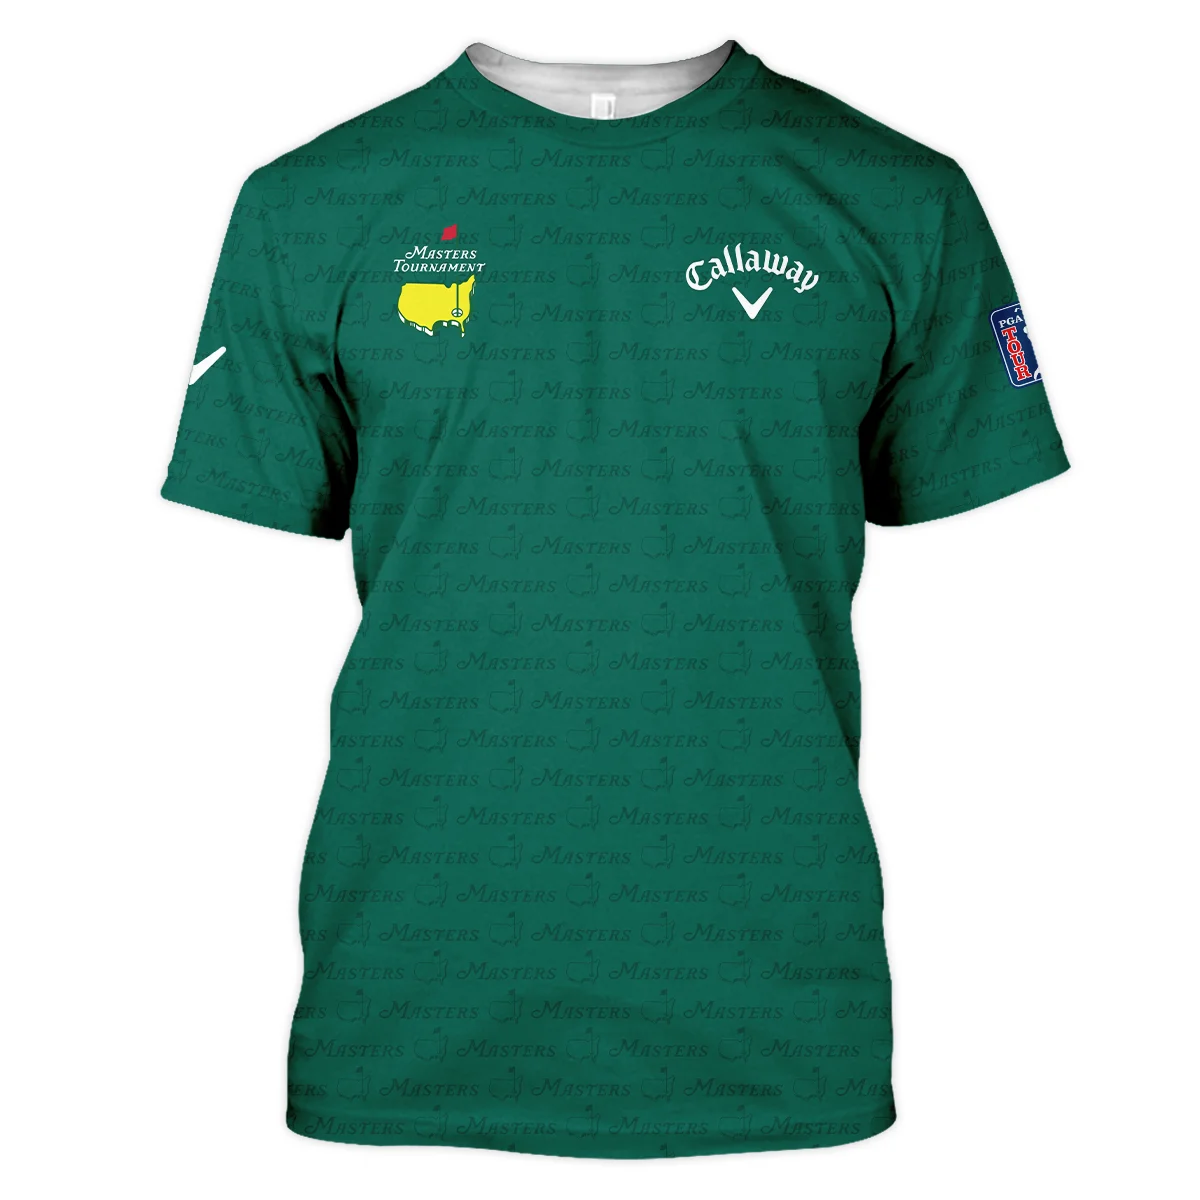 Golf Pattern Cup Green Masters Tournament Callaway Unisex T-Shirt Style Classic T-Shirt